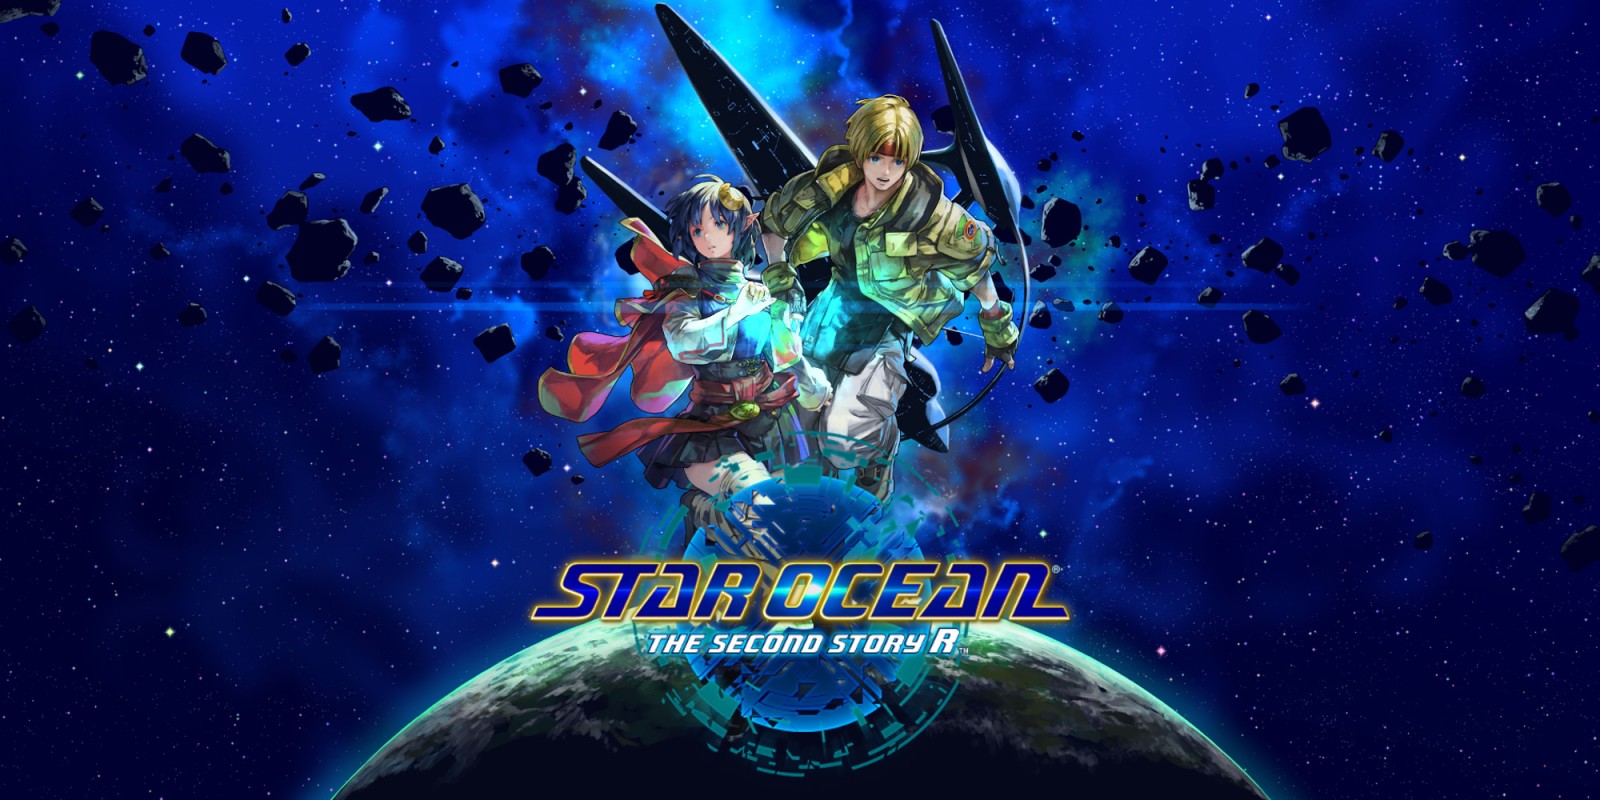 La5t Game You Fini5hed And Your Thought5 - Page 28 2x1_NSwitch_StarOceanTheSecondStoryR_image1600w